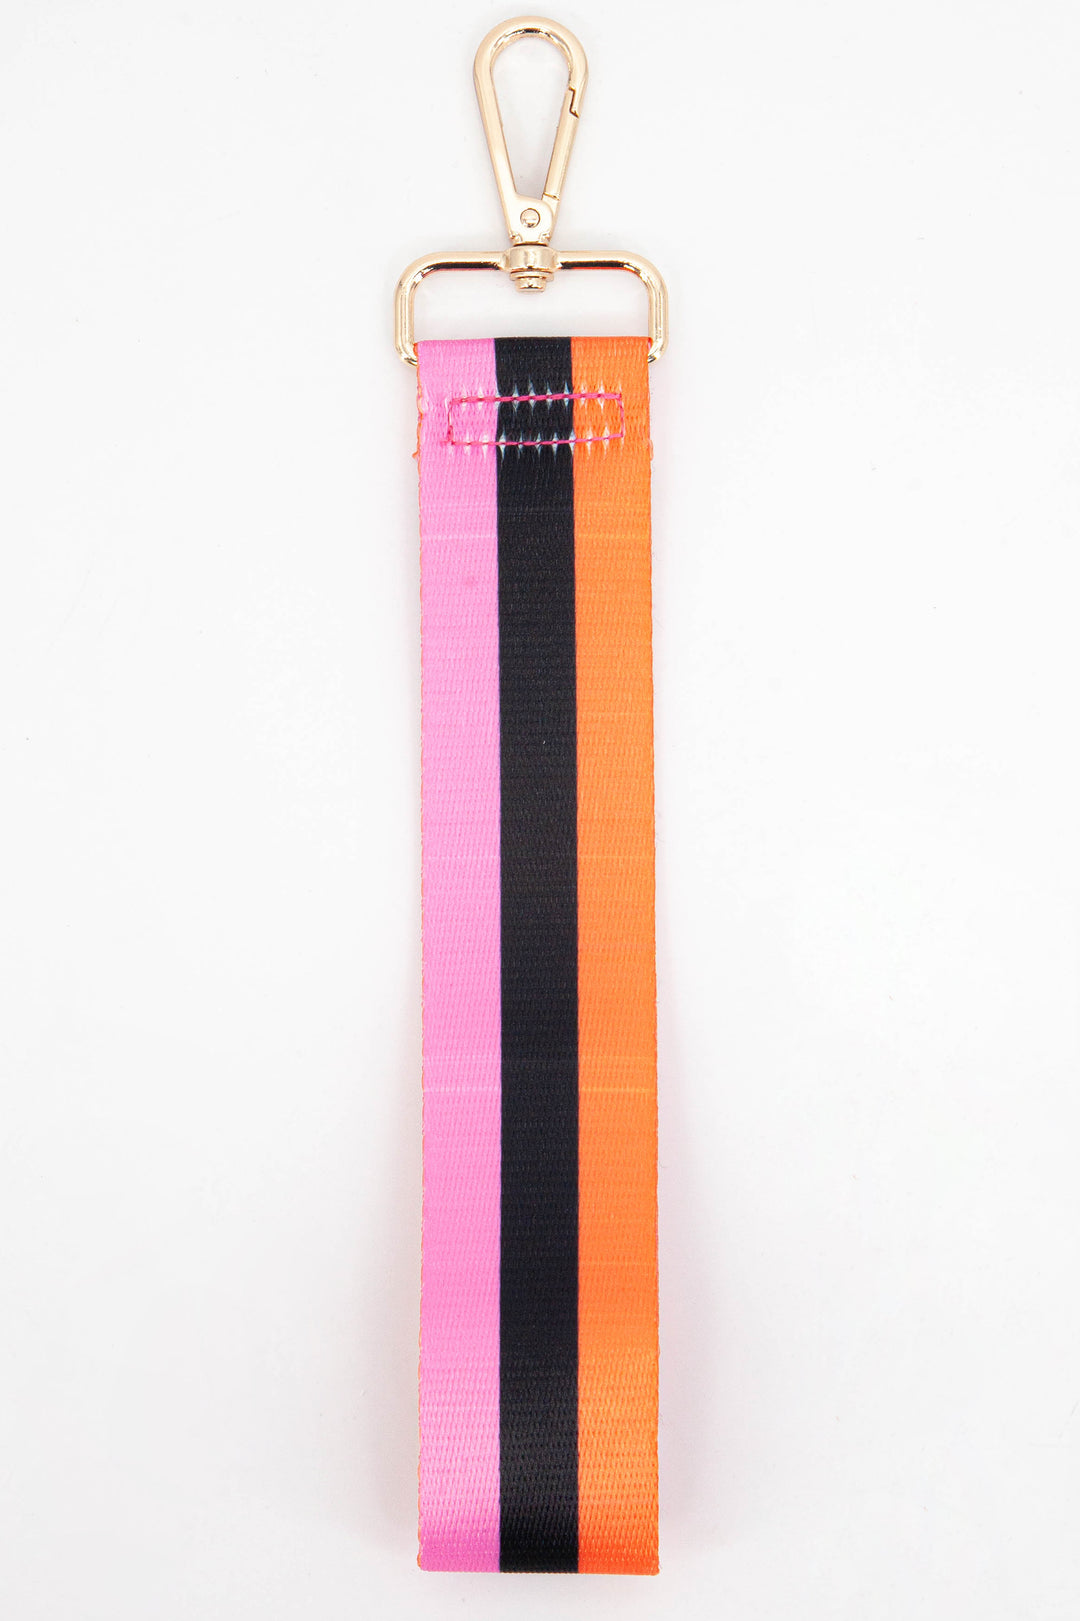 pink, orange and black contasting striped clutch bag wrist strap with gold hardware